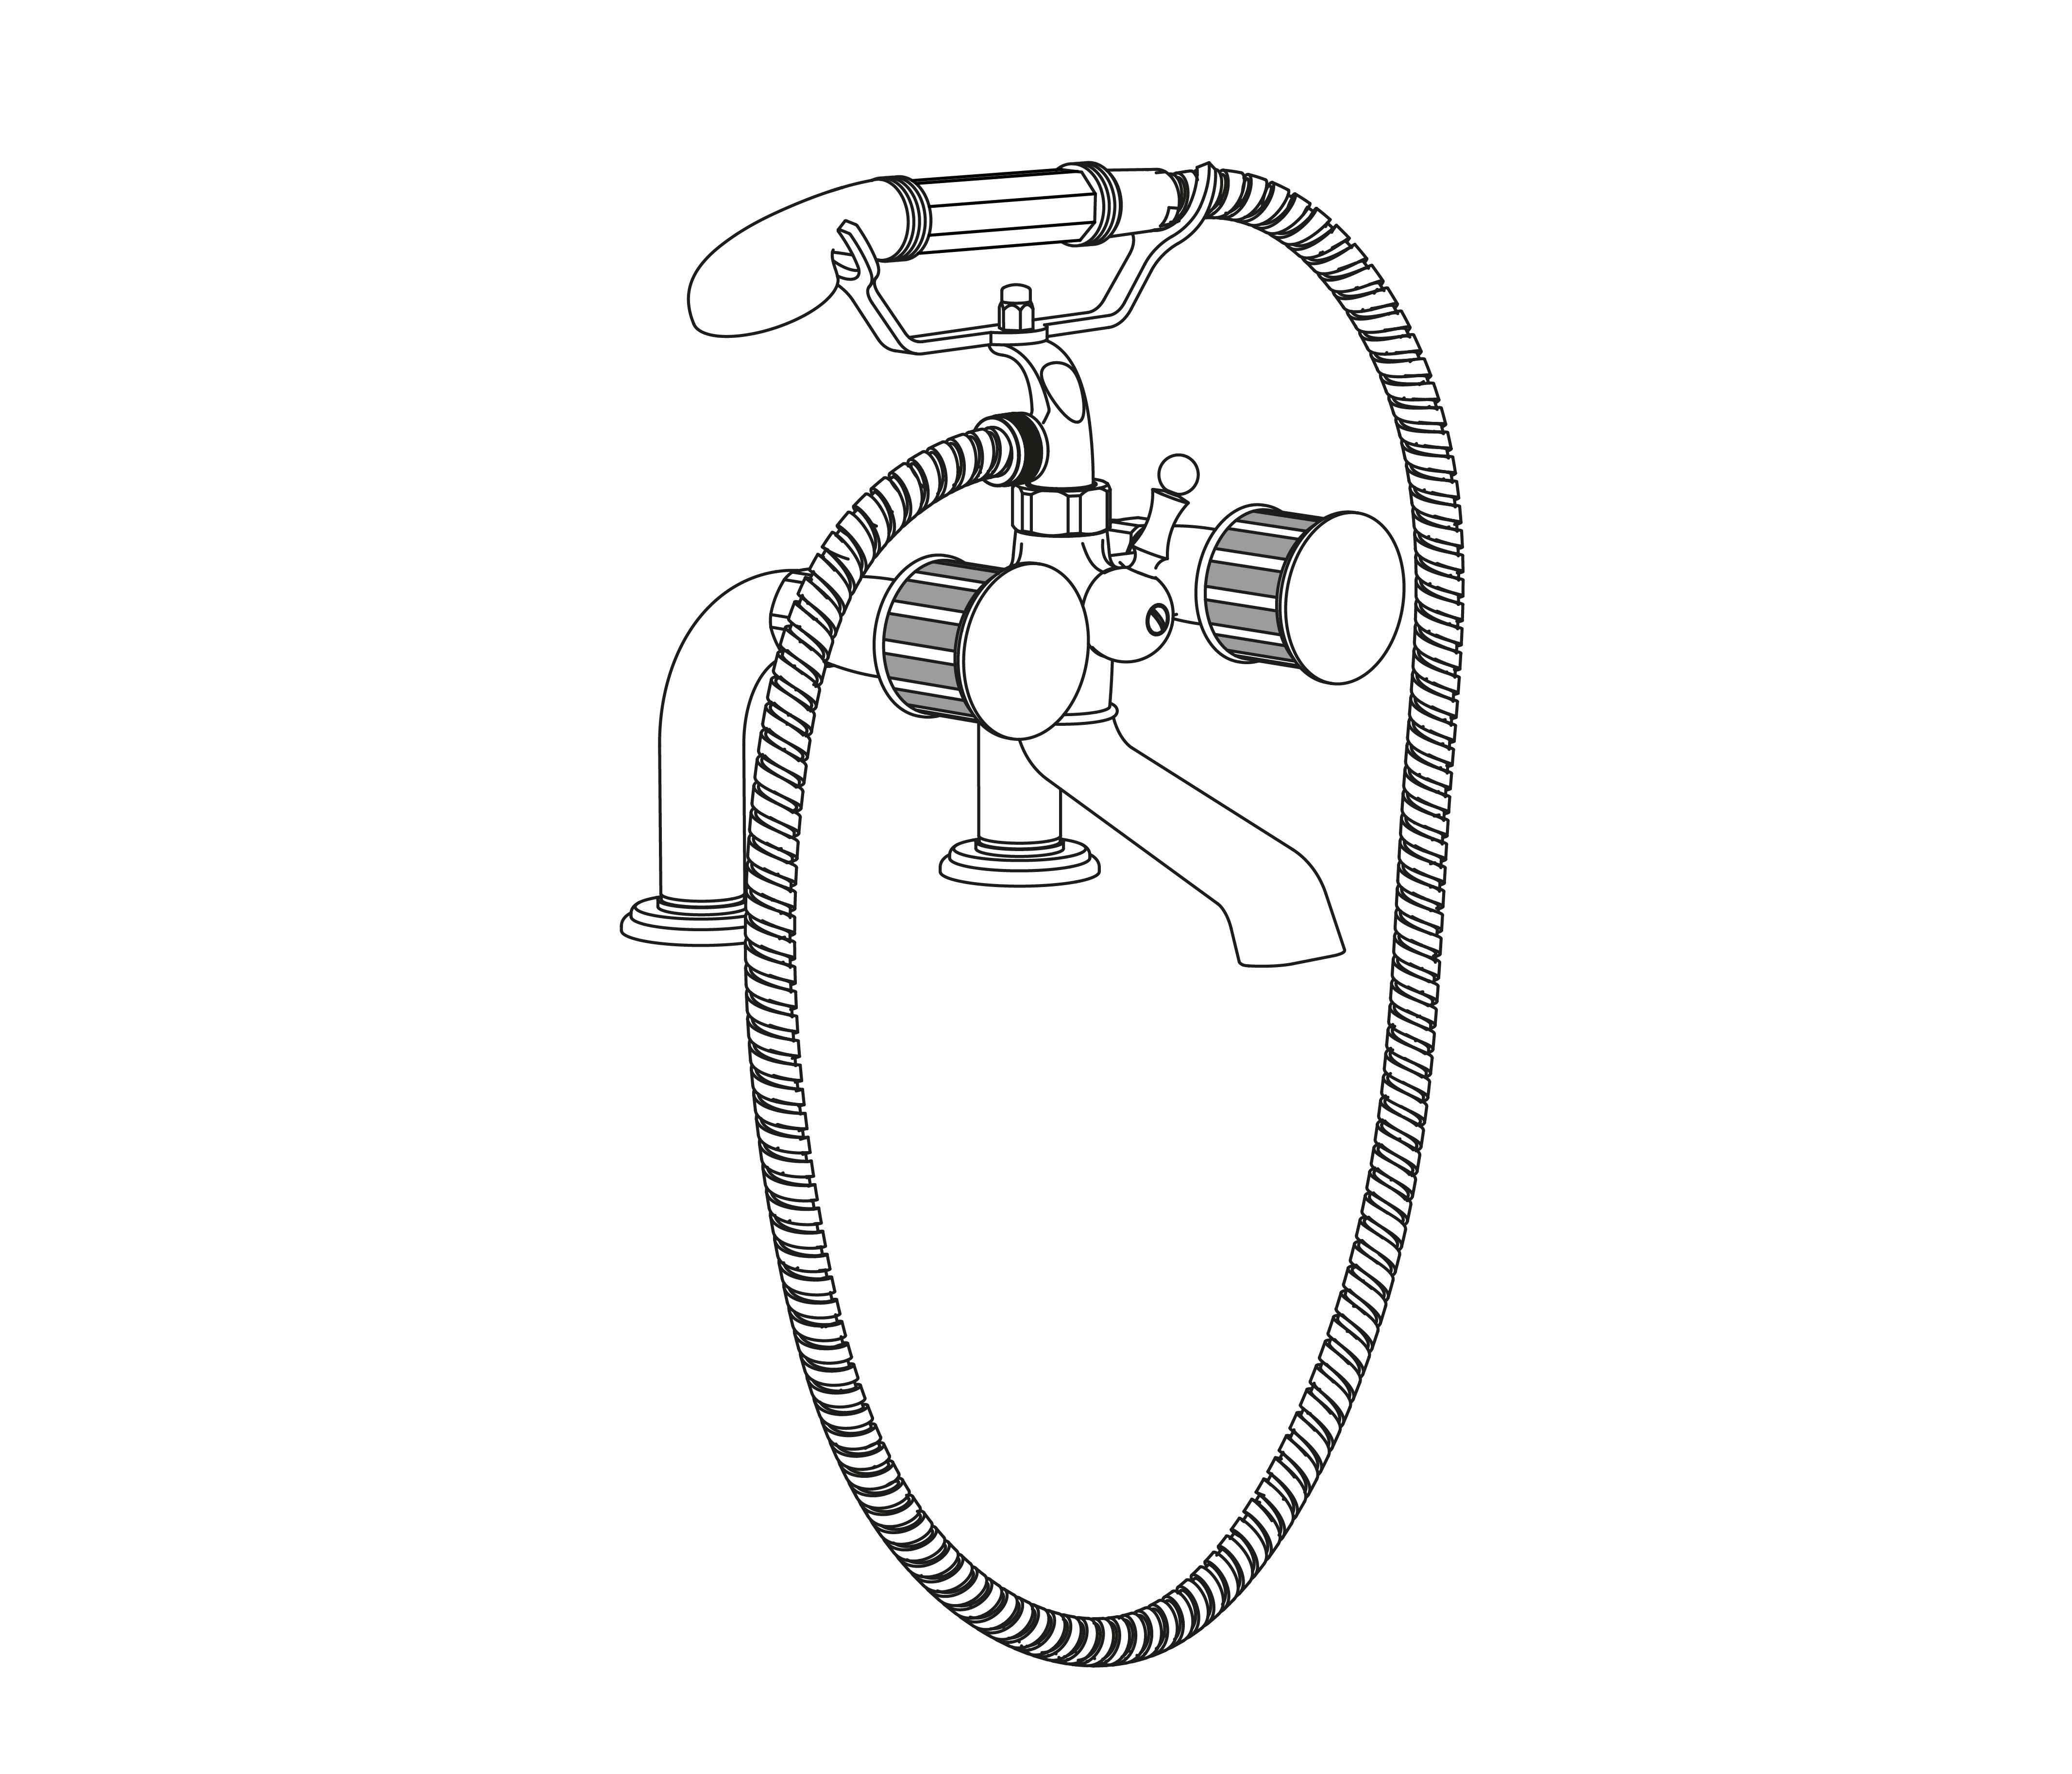 S118-3306 Rim mounted bath and shower mixer